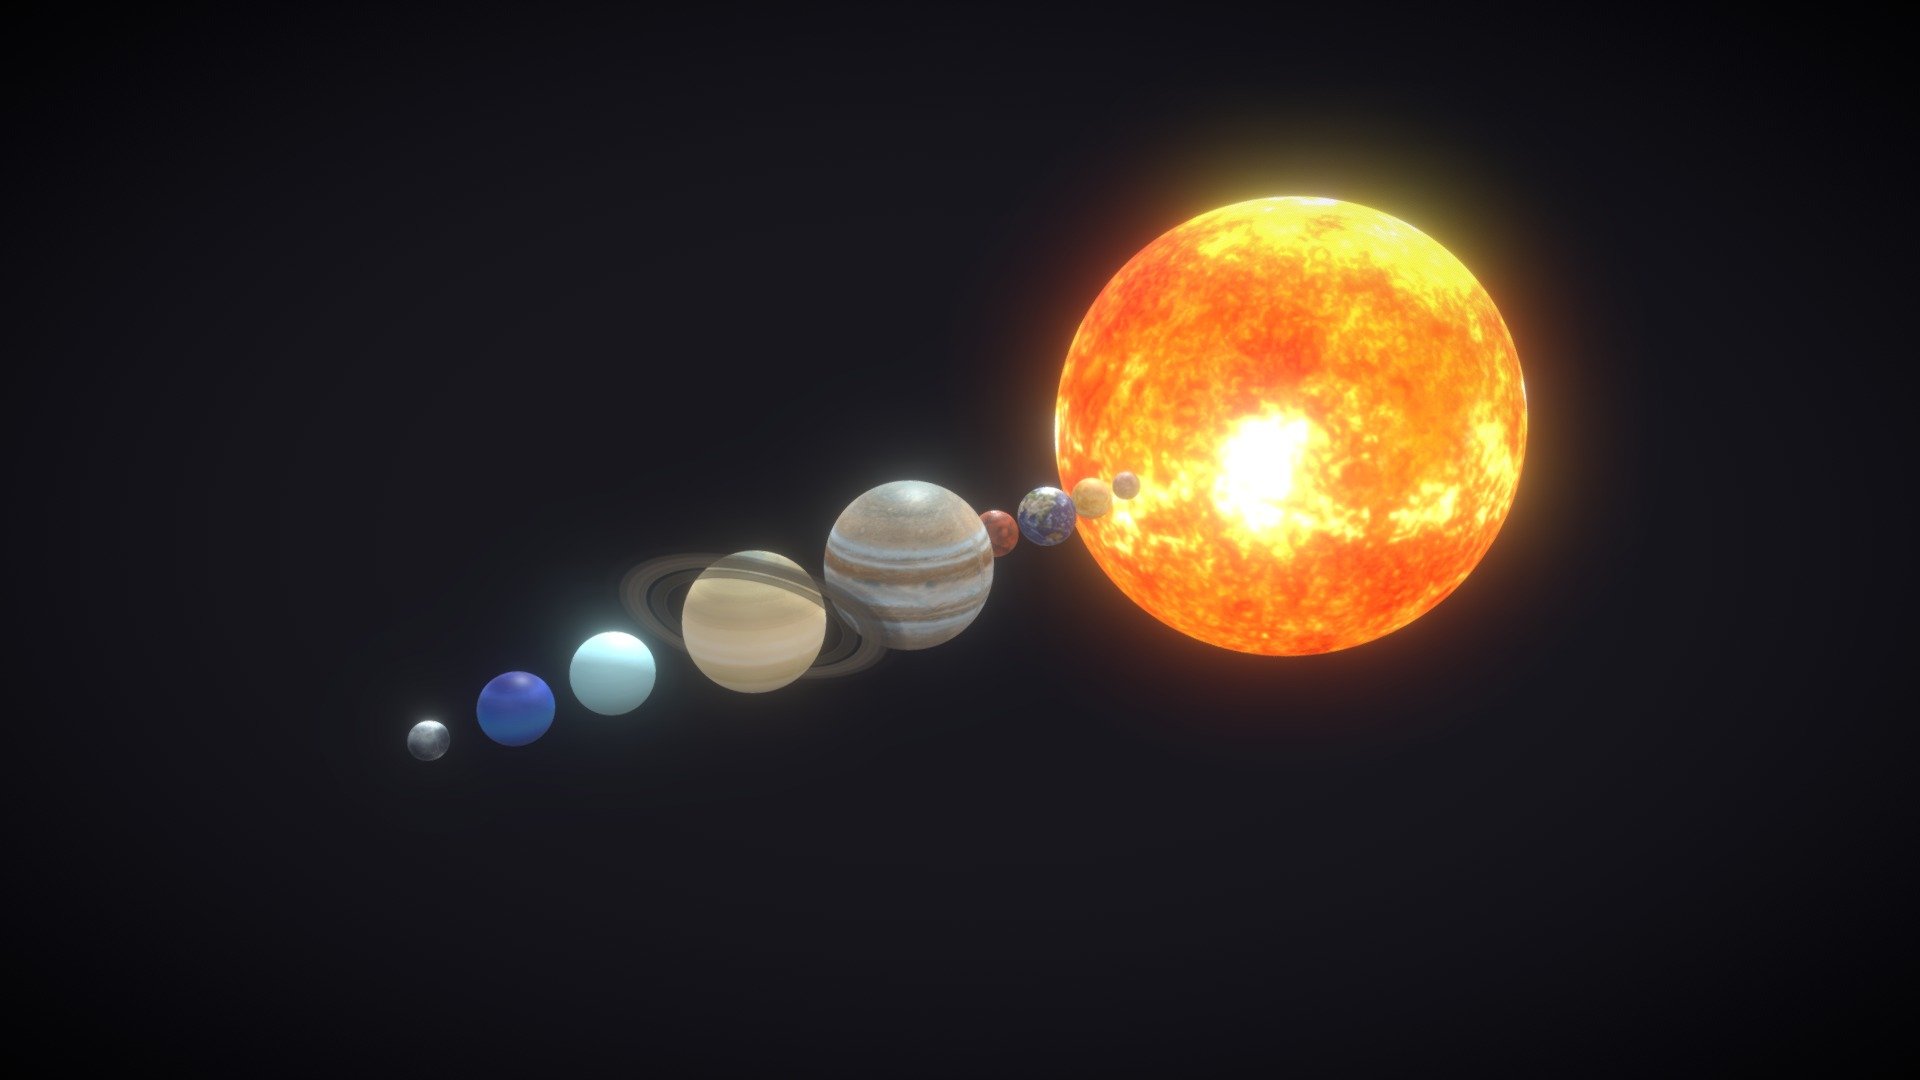 Photorealistic Solar System + Pluto 8k Textures  consists out of separate 3D models for Sun, 8 planets, Pluto and Moon:


Sun, Mercury, Venus, Mars, Jupiter, Uranus, Neptune, Pluto (24577 P, 24582 V)
Earth (24576 P, 24578 V)
Moon (24578 P, 24582 V
Saturn (24705 P, 24838 V)

Technical details:


File formats included in the package are: FBX, OBJ, GLB, ABC, PLY, STL, BLEND, x3d, gLTF (generated), USDZ (generated)
Native software file format: BLEND
Polygons: 270,475
Vertices: 270,654
Textures: Color, Metallic, Roughness, Normal, AO.
All textures are 8k (8192x4096) resolution.

Notes:


For Earth - The ground (surface) and clouds (atmosphere) are fused in the same texture.
The model uses only color and normal textures and there is also the texture for the background stars in the pack.
There is also a beauty light to simulate some glow at the edge of the planet (this will be available only in the .blend file).
 - Photorealistic Solar System + Pluto 8k Textures - Buy Royalty Free 3D model by 3DDisco 3d model